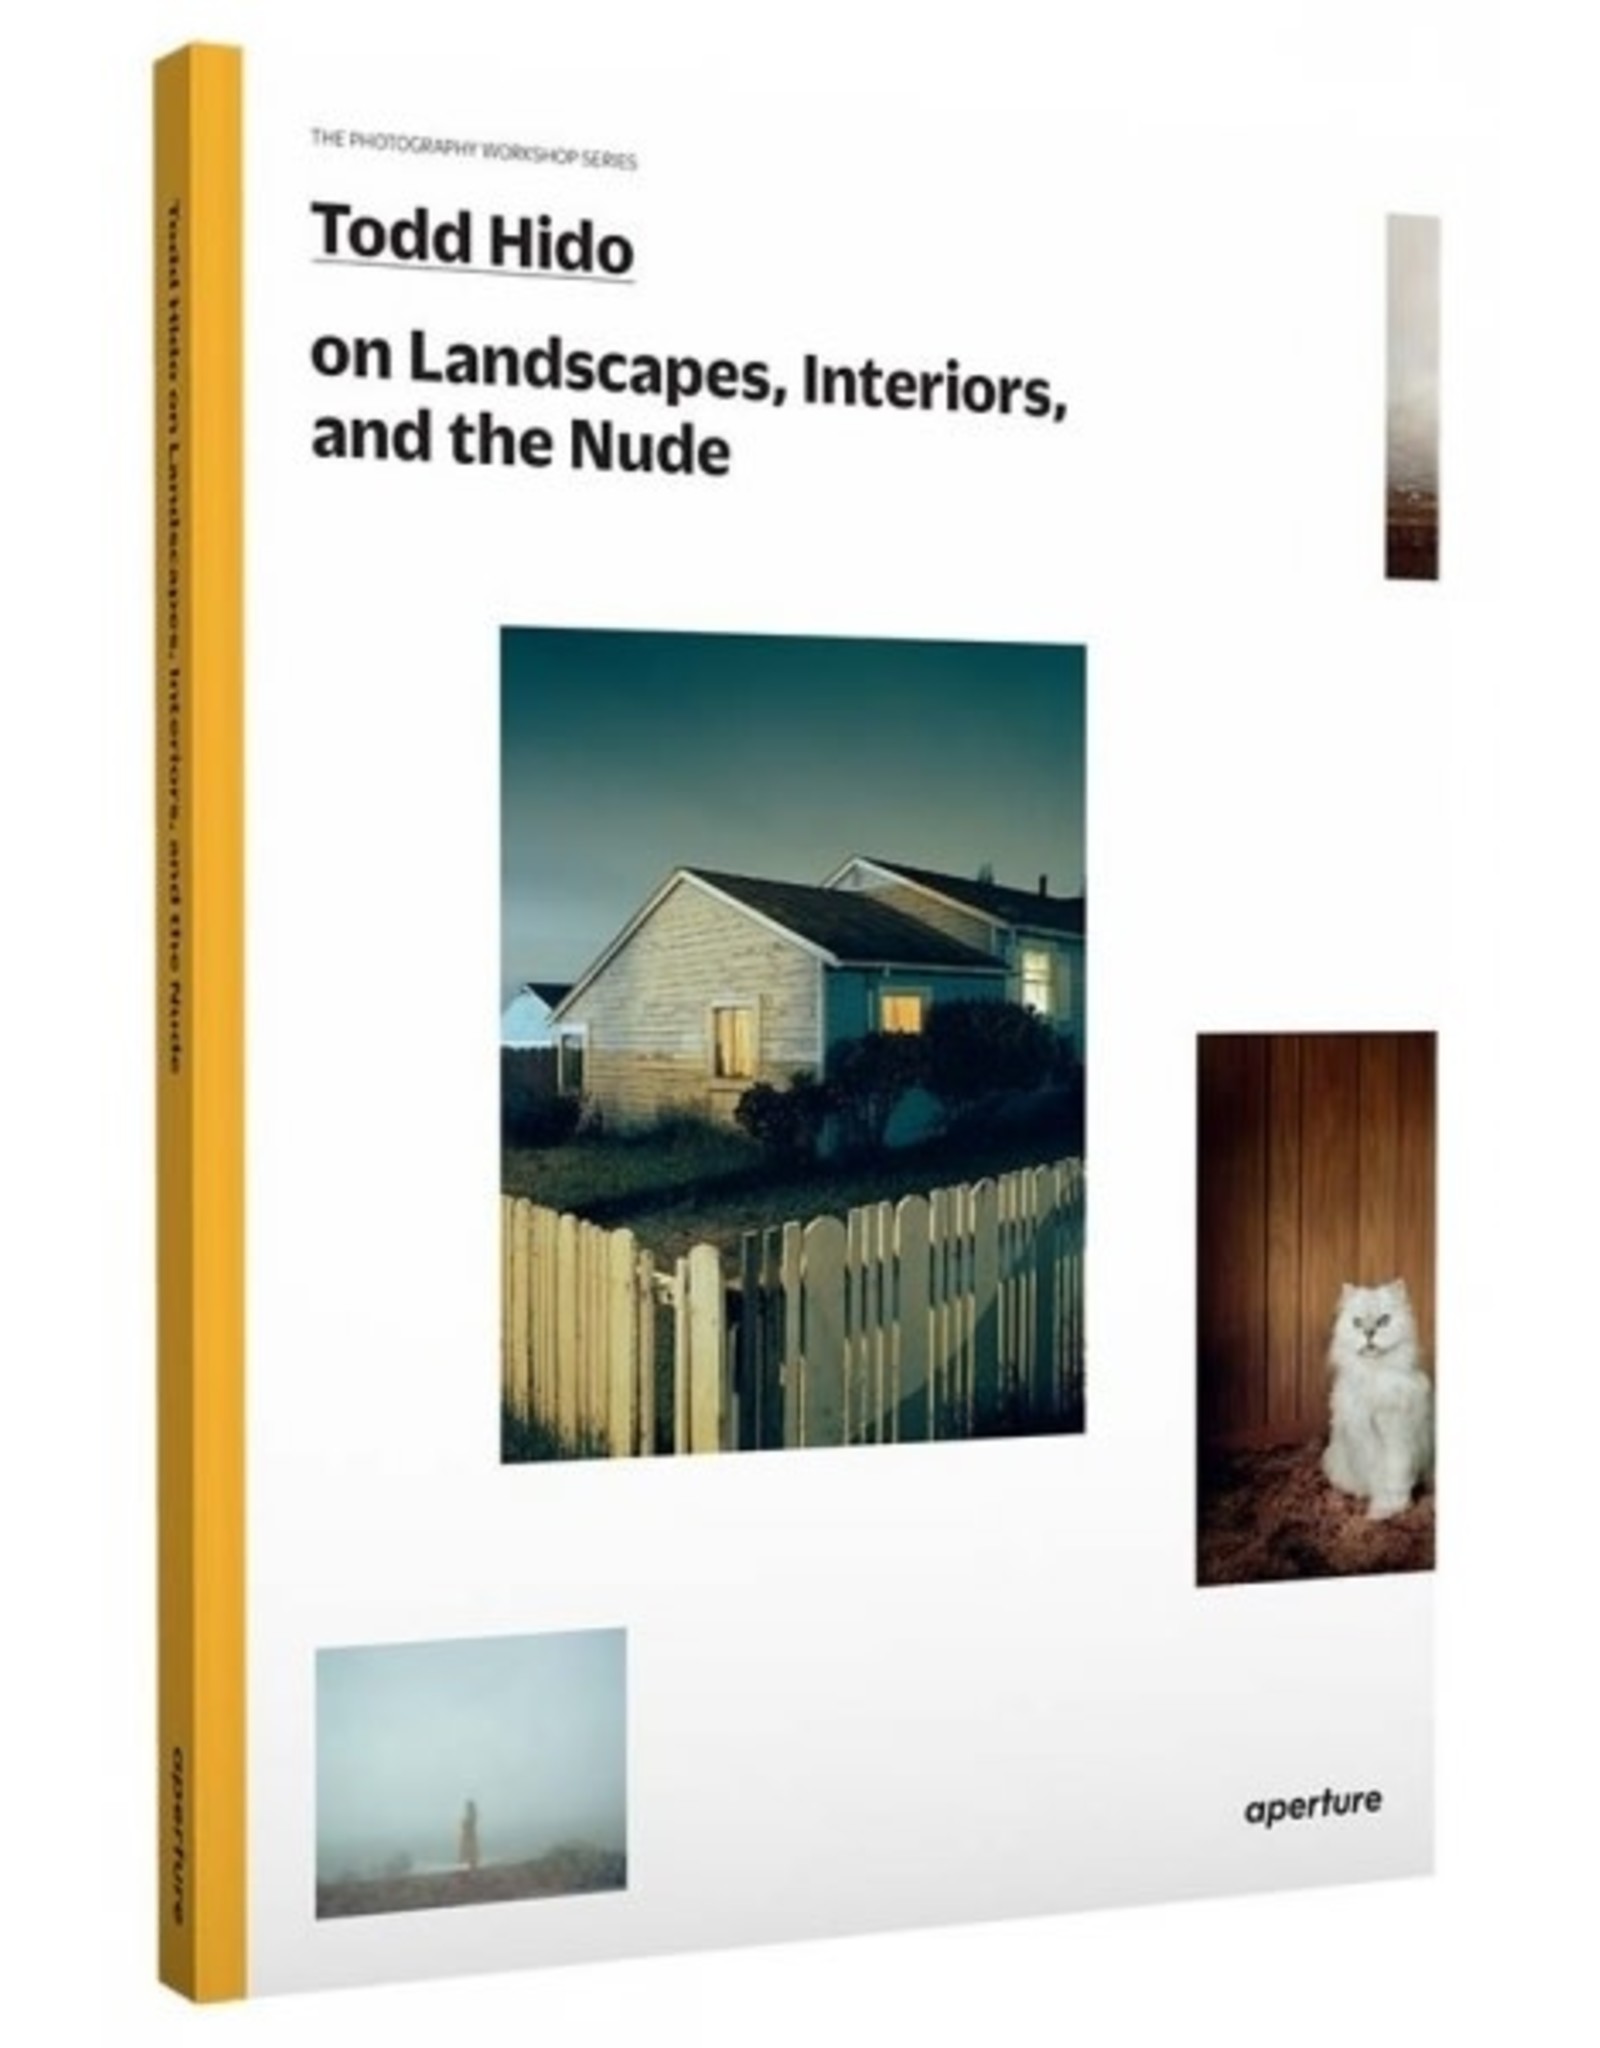 Todd Hido On Landscapes, Interiors, and the Nude (The Photography Workshop Series)